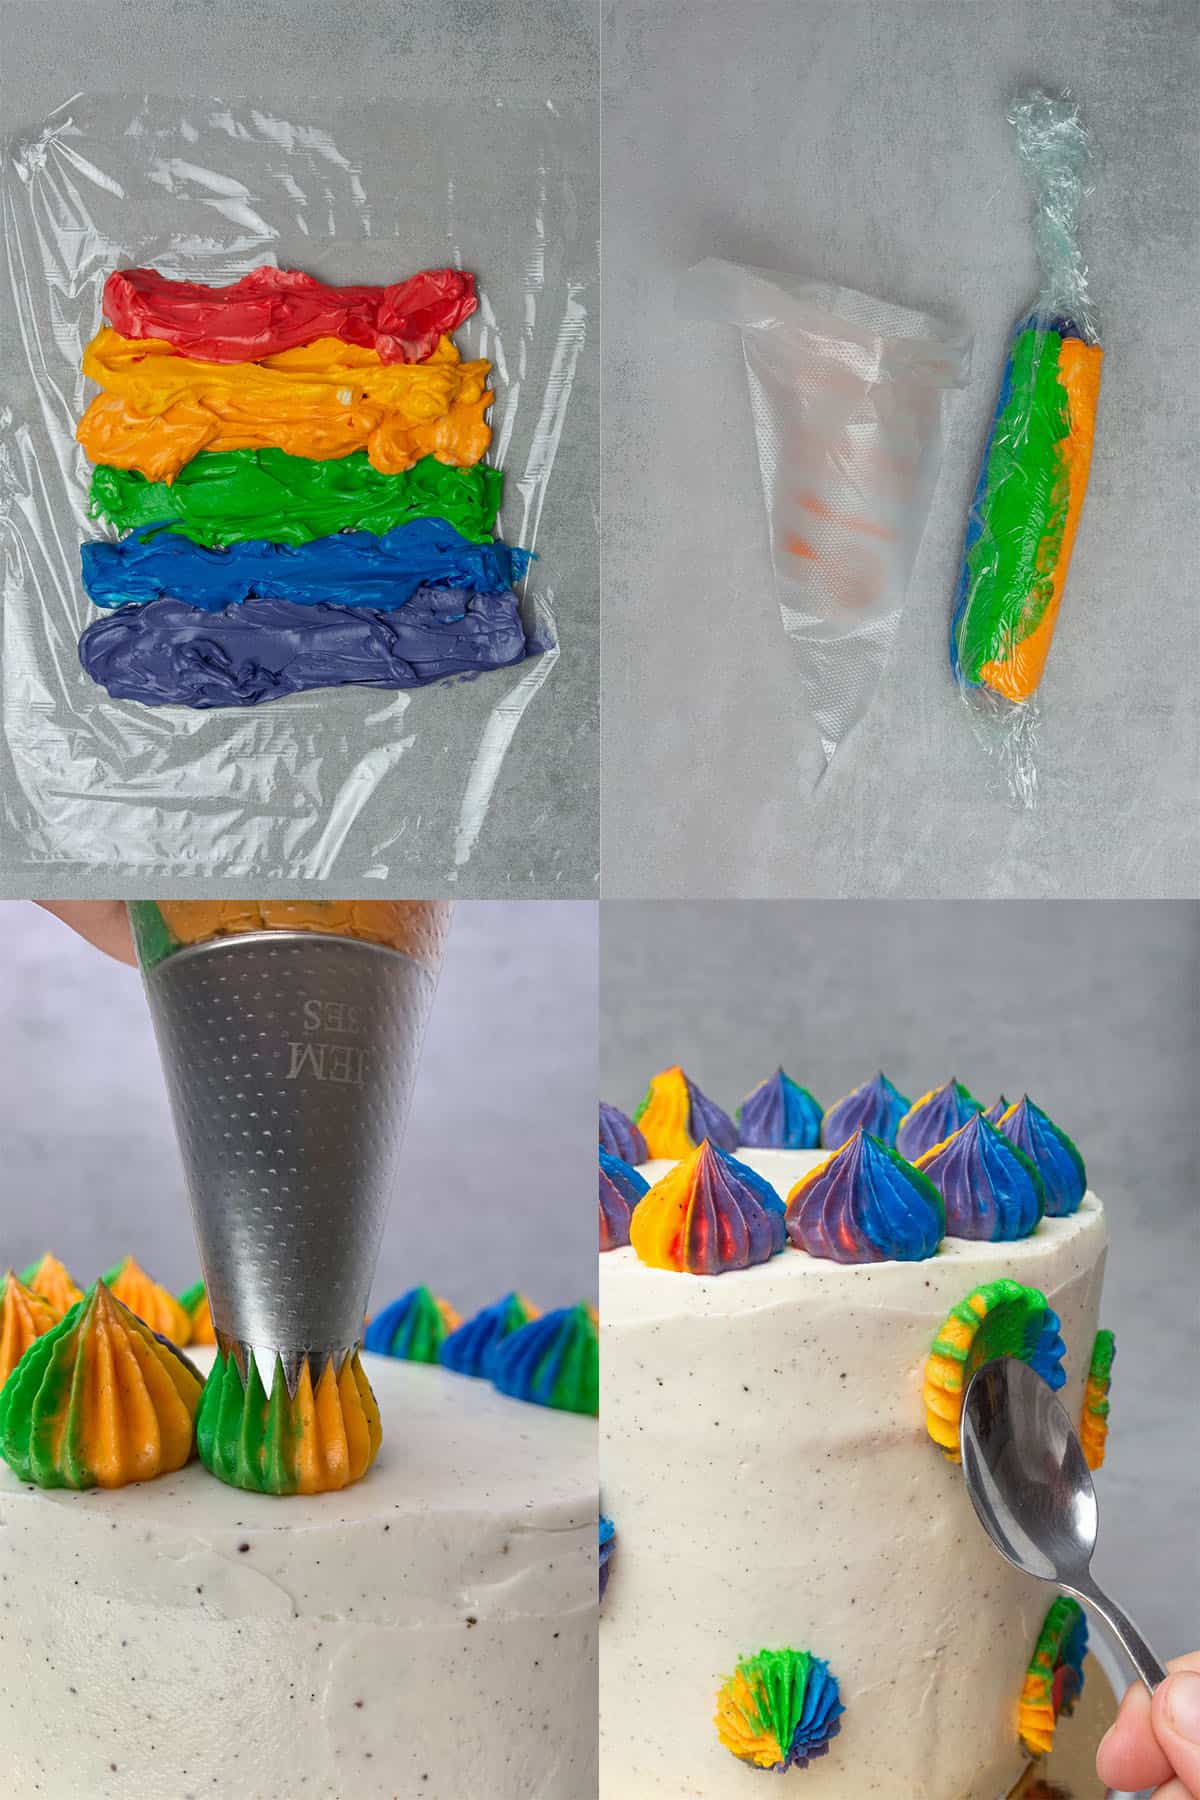 Step-by-step process for the cream cheese piping and decoration.